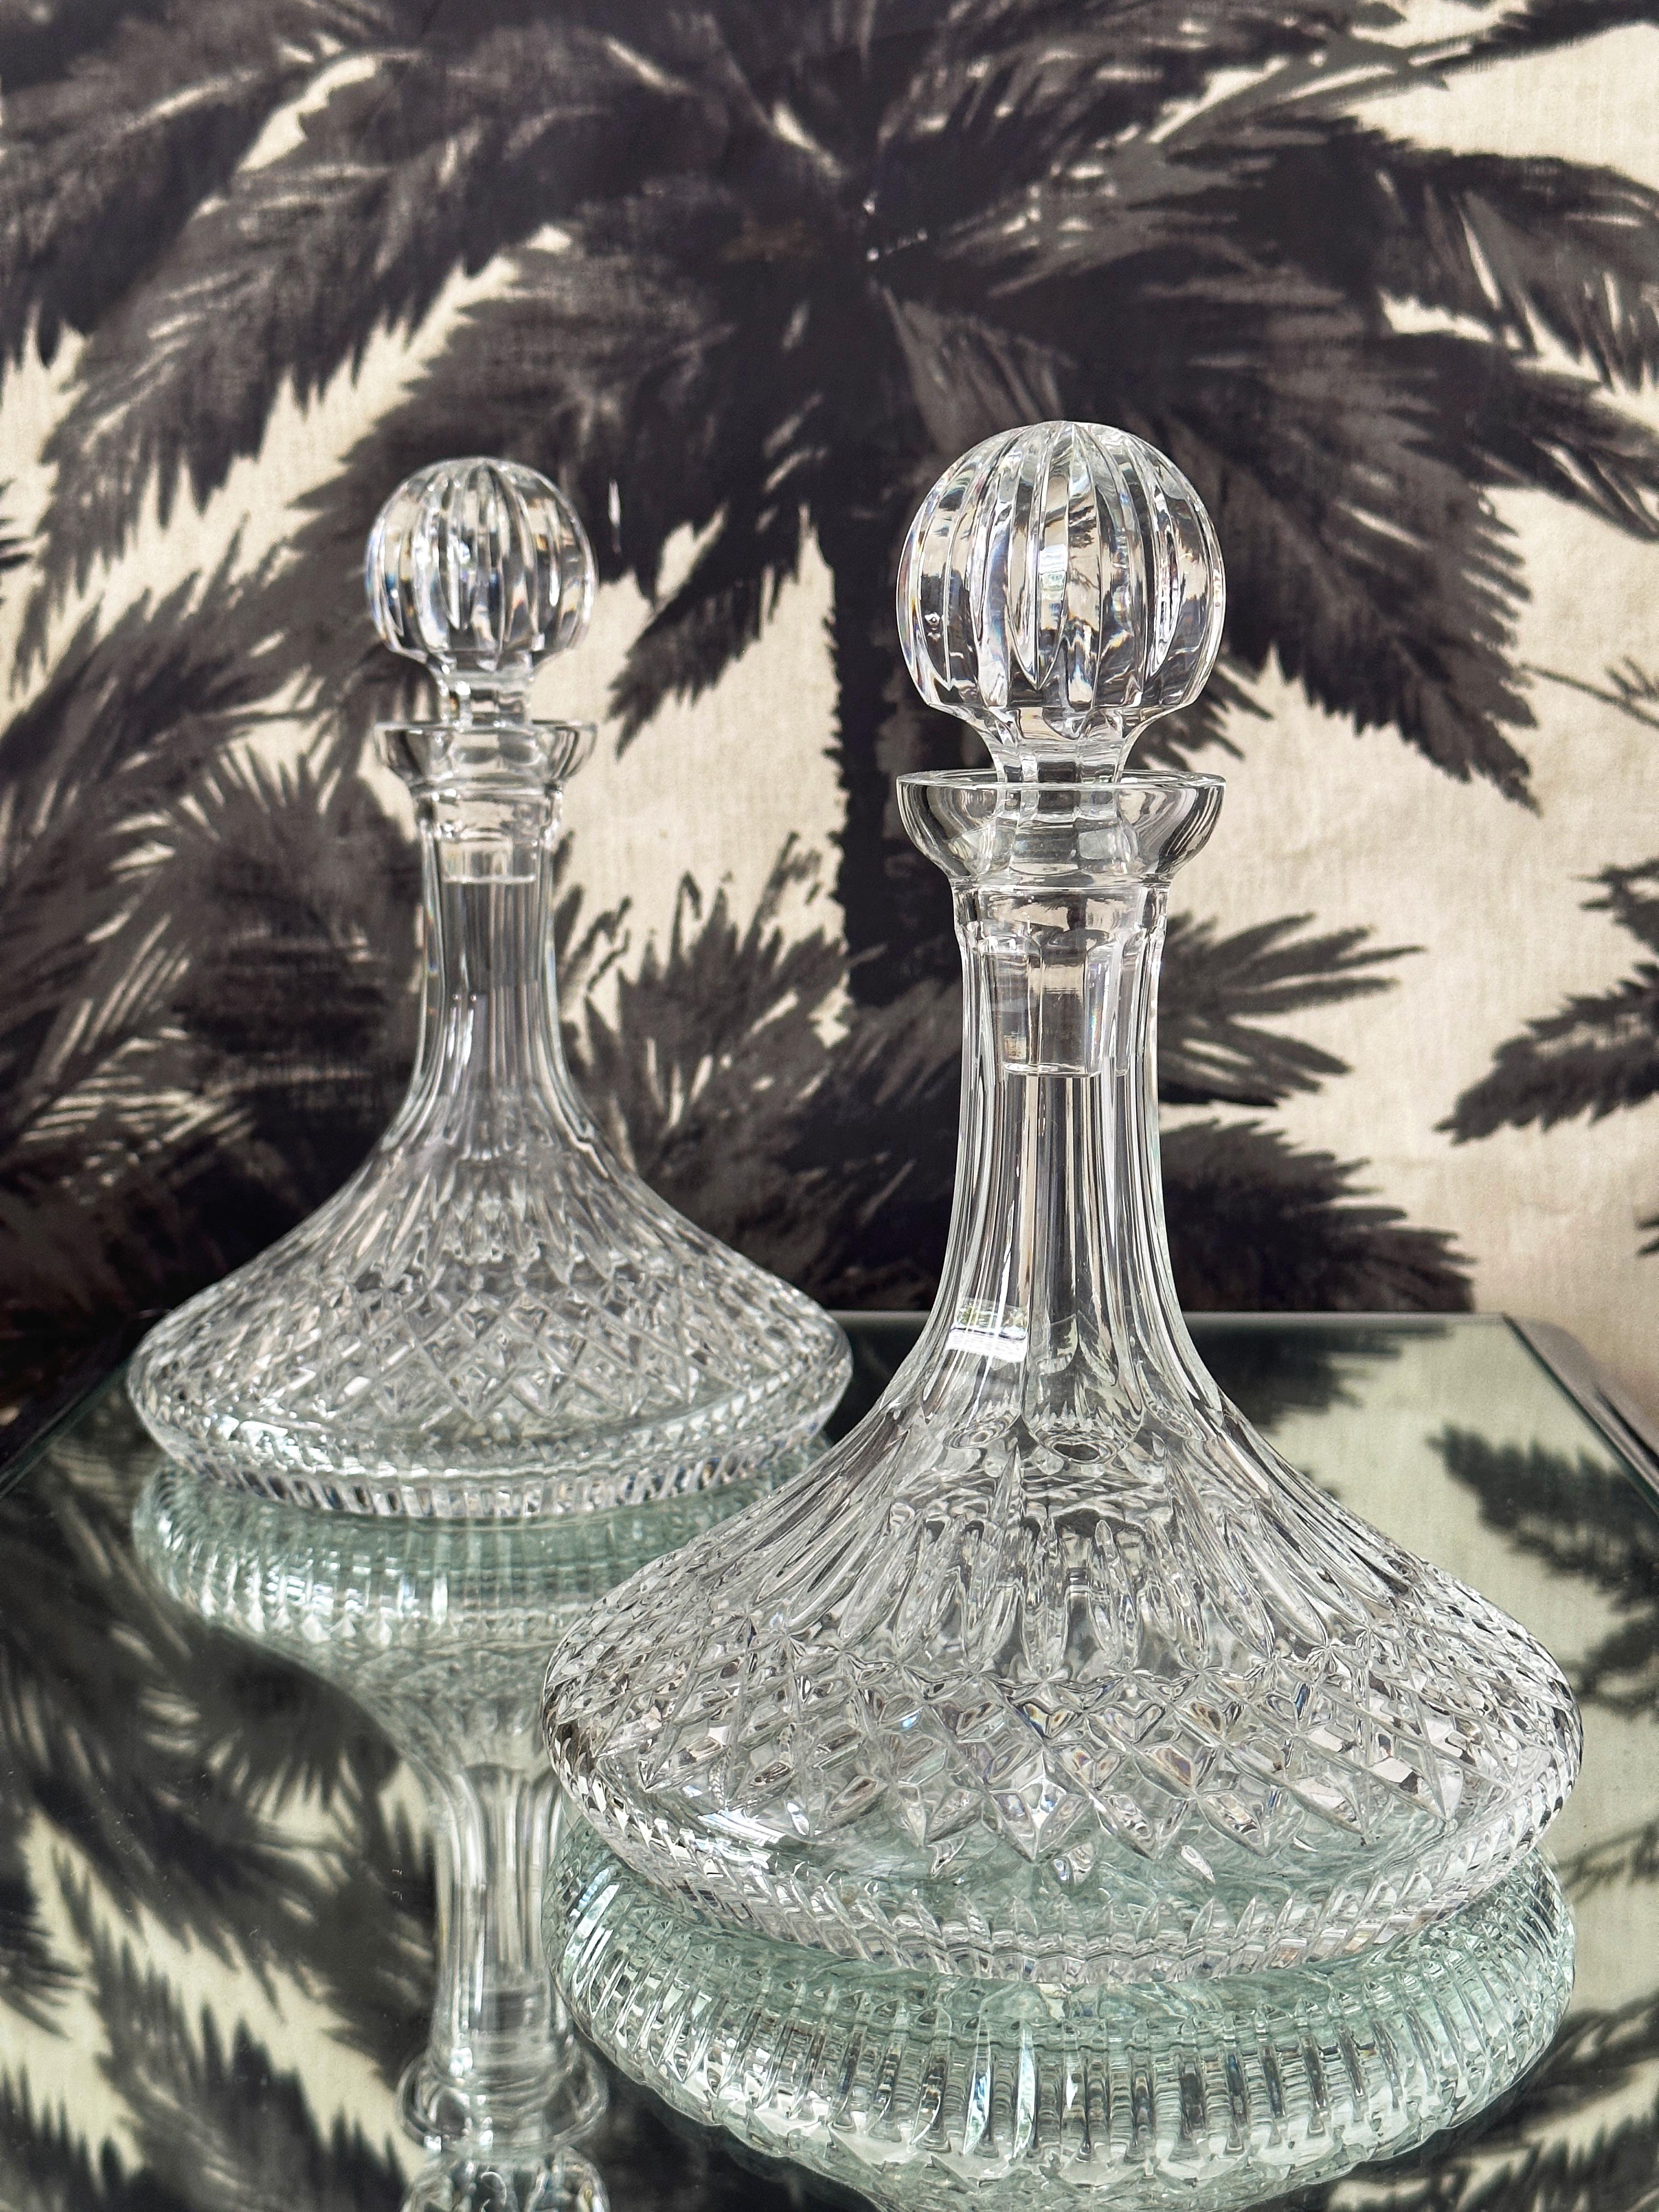 waterford ships decanter patterns